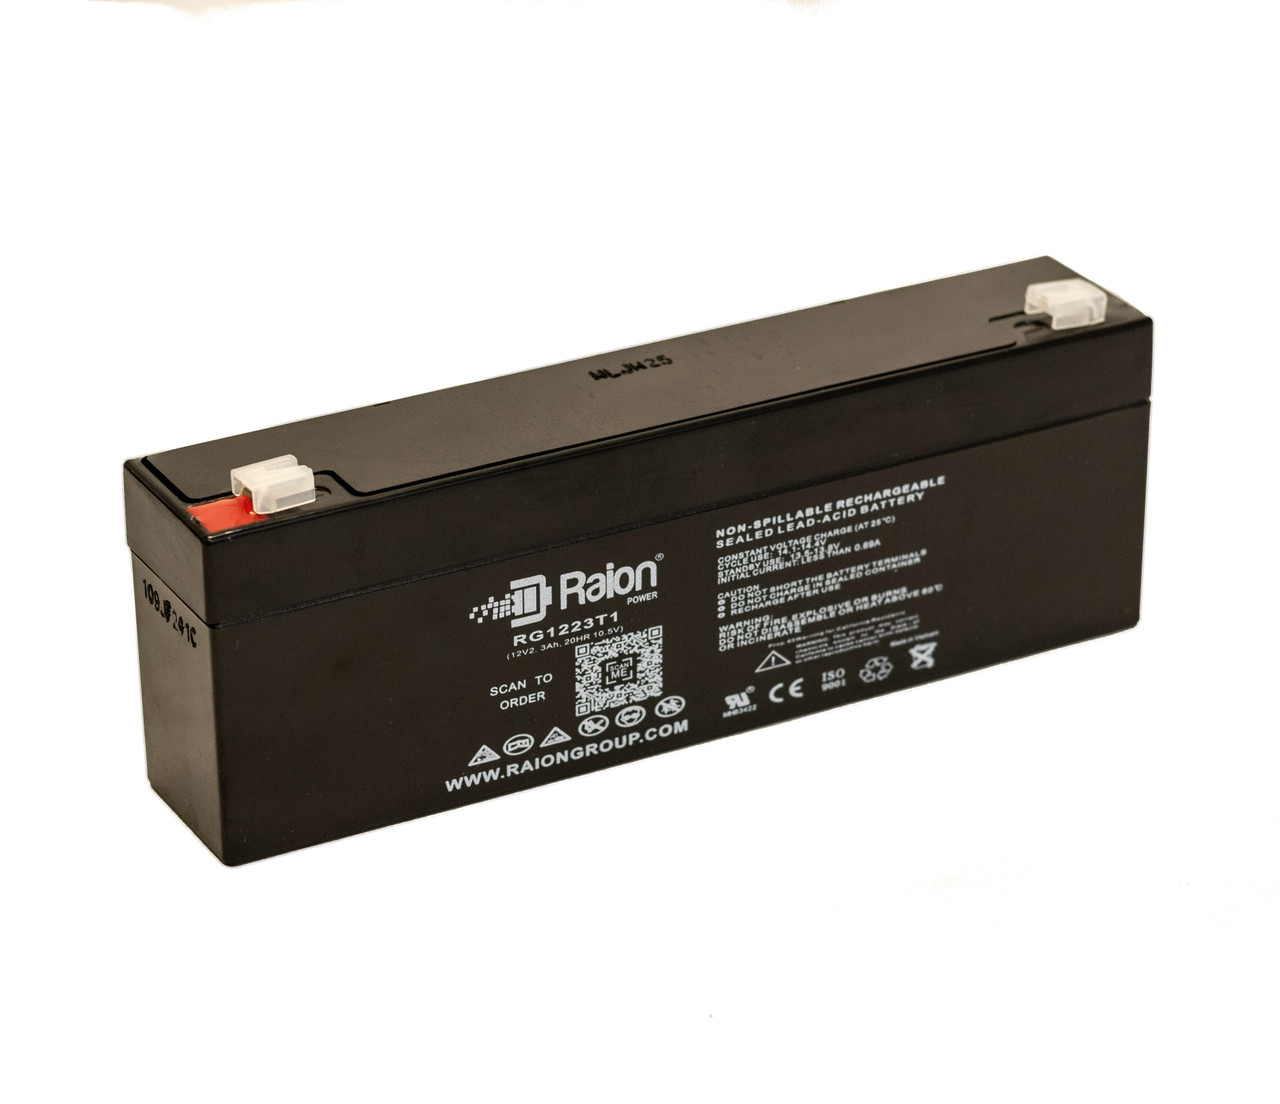 Raion Power RG1223T1 Replacement Battery for Viasys Healthcare SIPAP